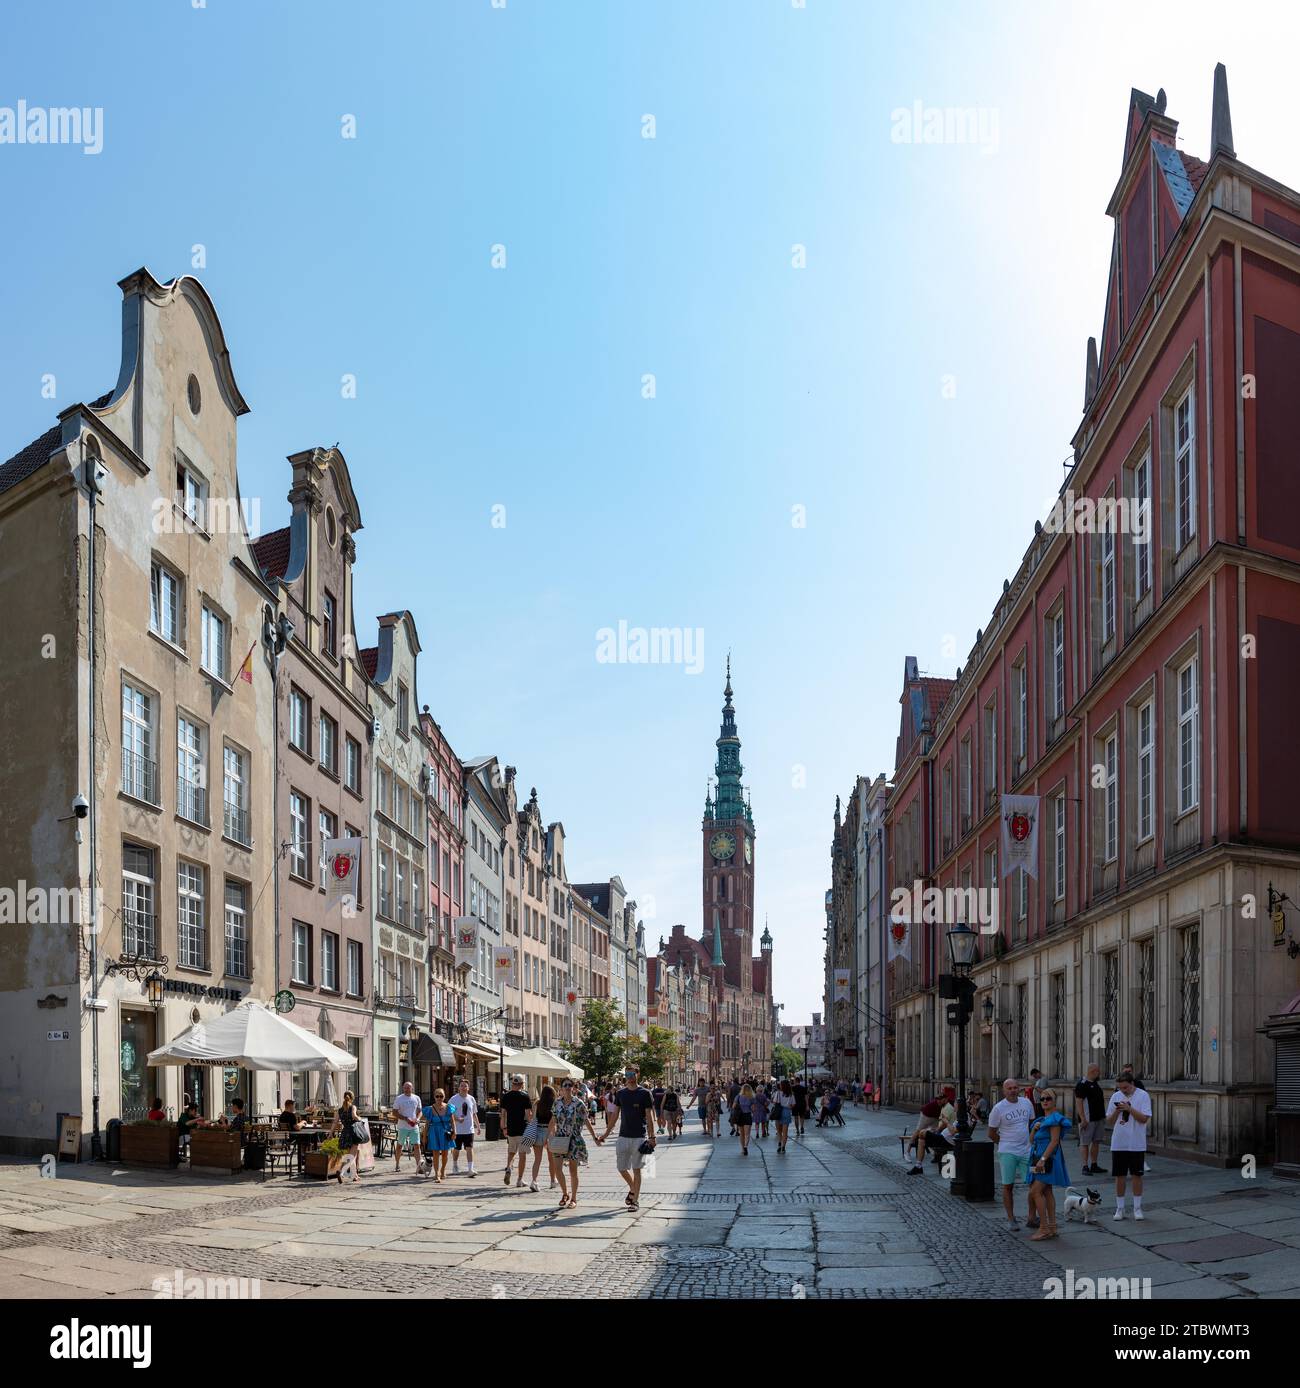 A picture of the Long Street in Gdansk, with the Main Town Hall at the end Stock Photo